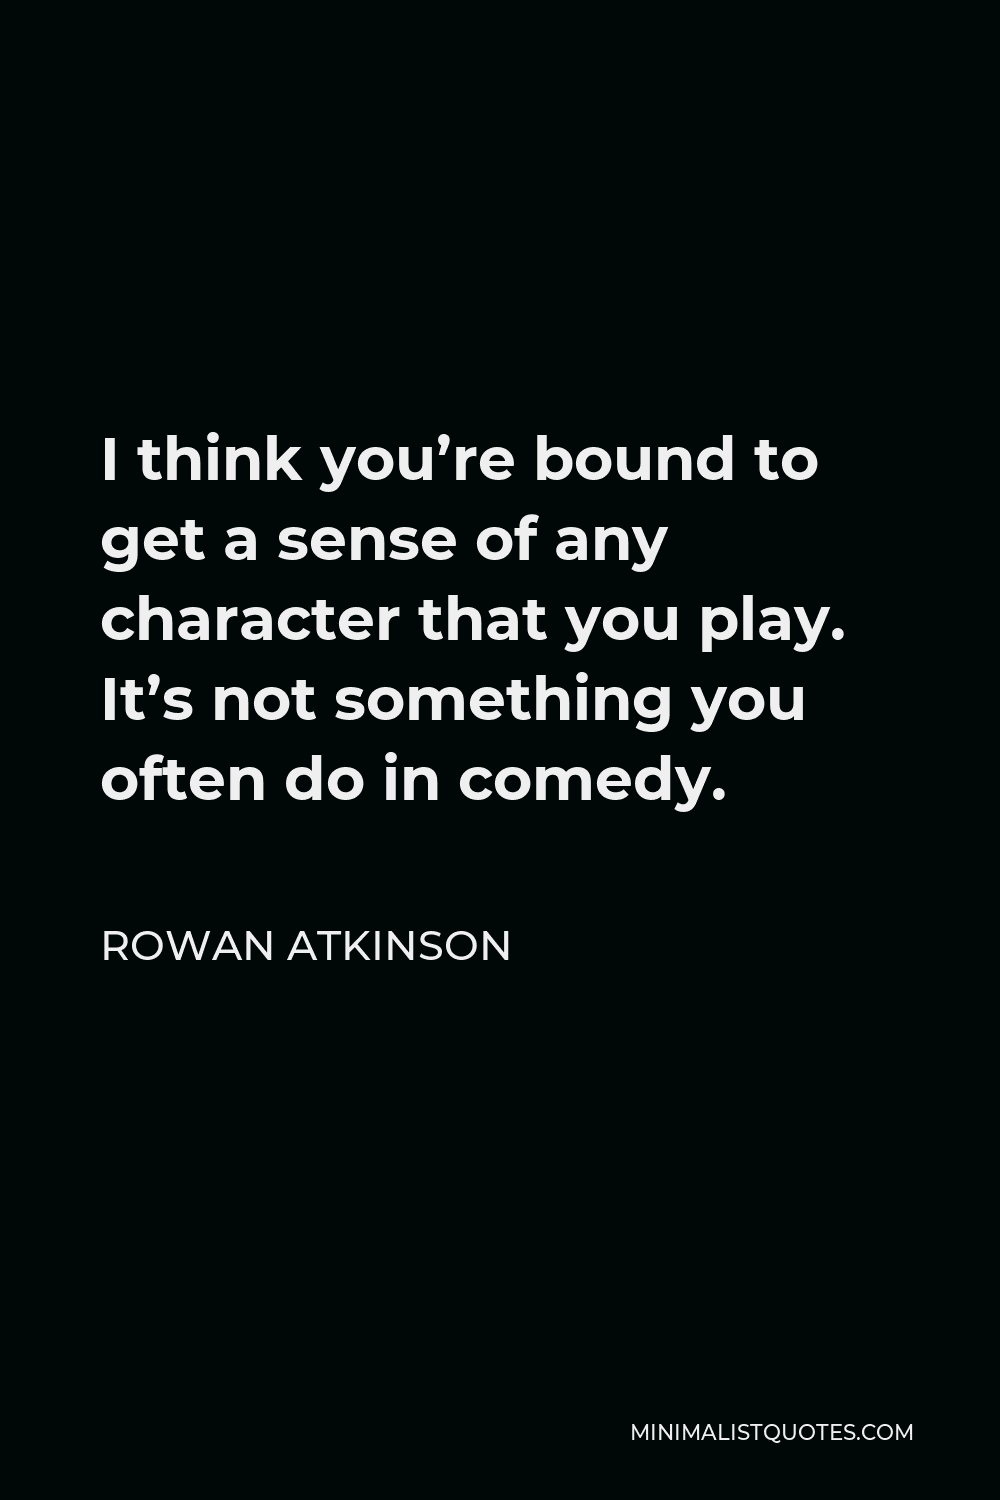 Rowan Atkinson Quote - I think you’re bound to get a sense of any character that you play. It’s not something you often do in comedy.